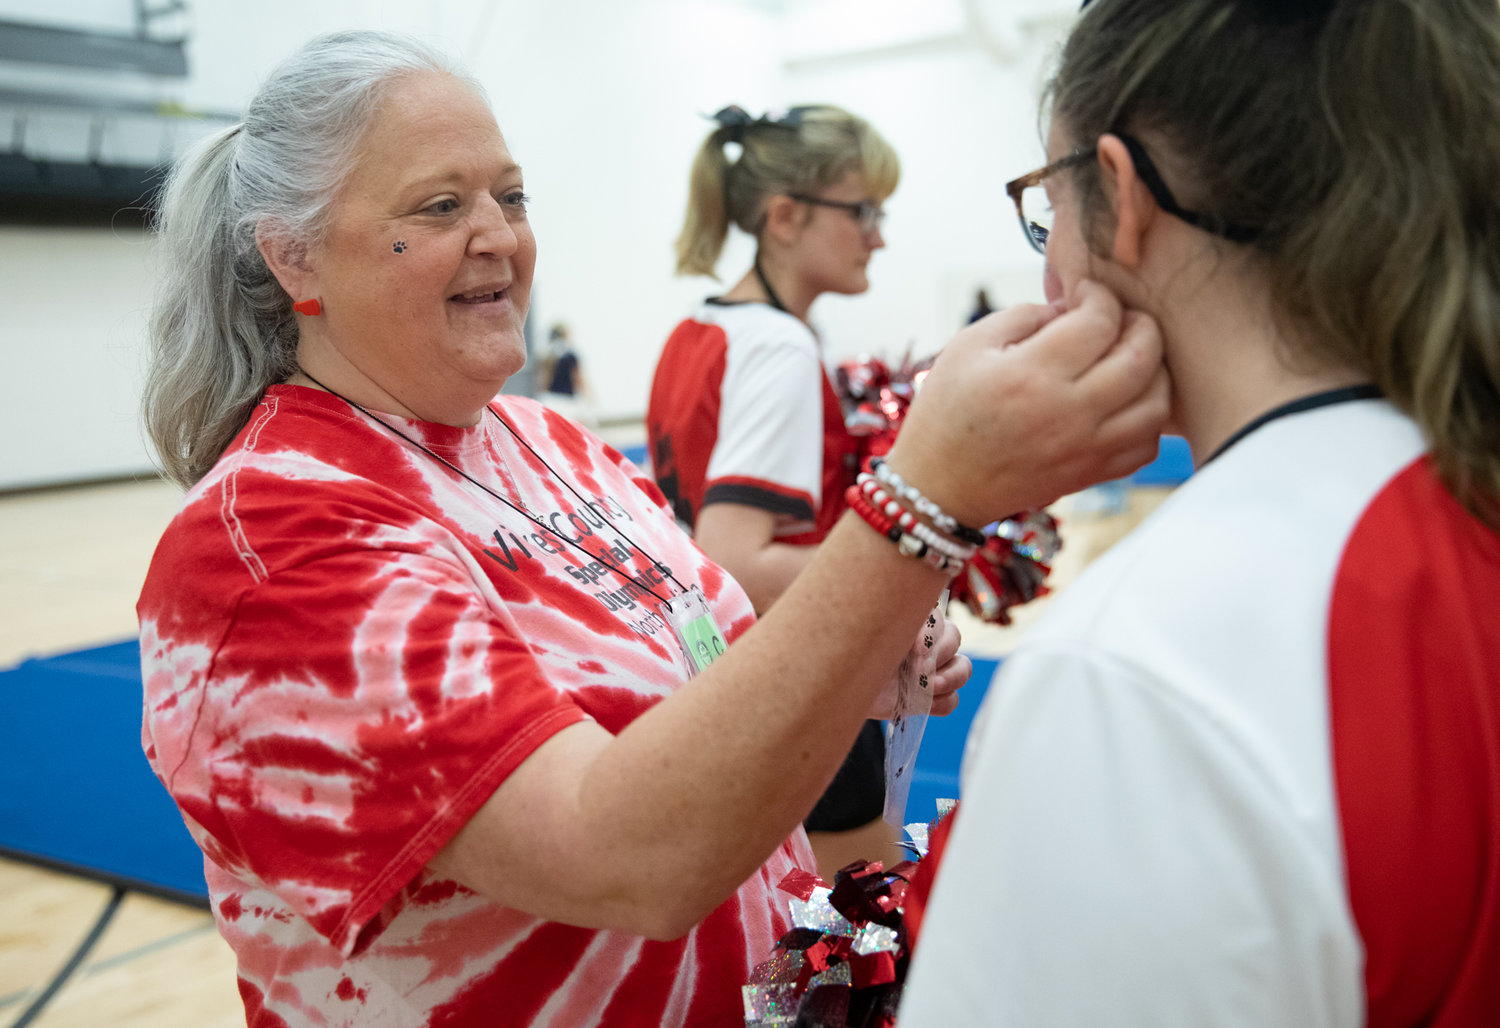 Coaches help cheerleaders with costumes and makeup before performing routines at the Special Olympics N.C. Cheerleading competition at Seaforth High School.